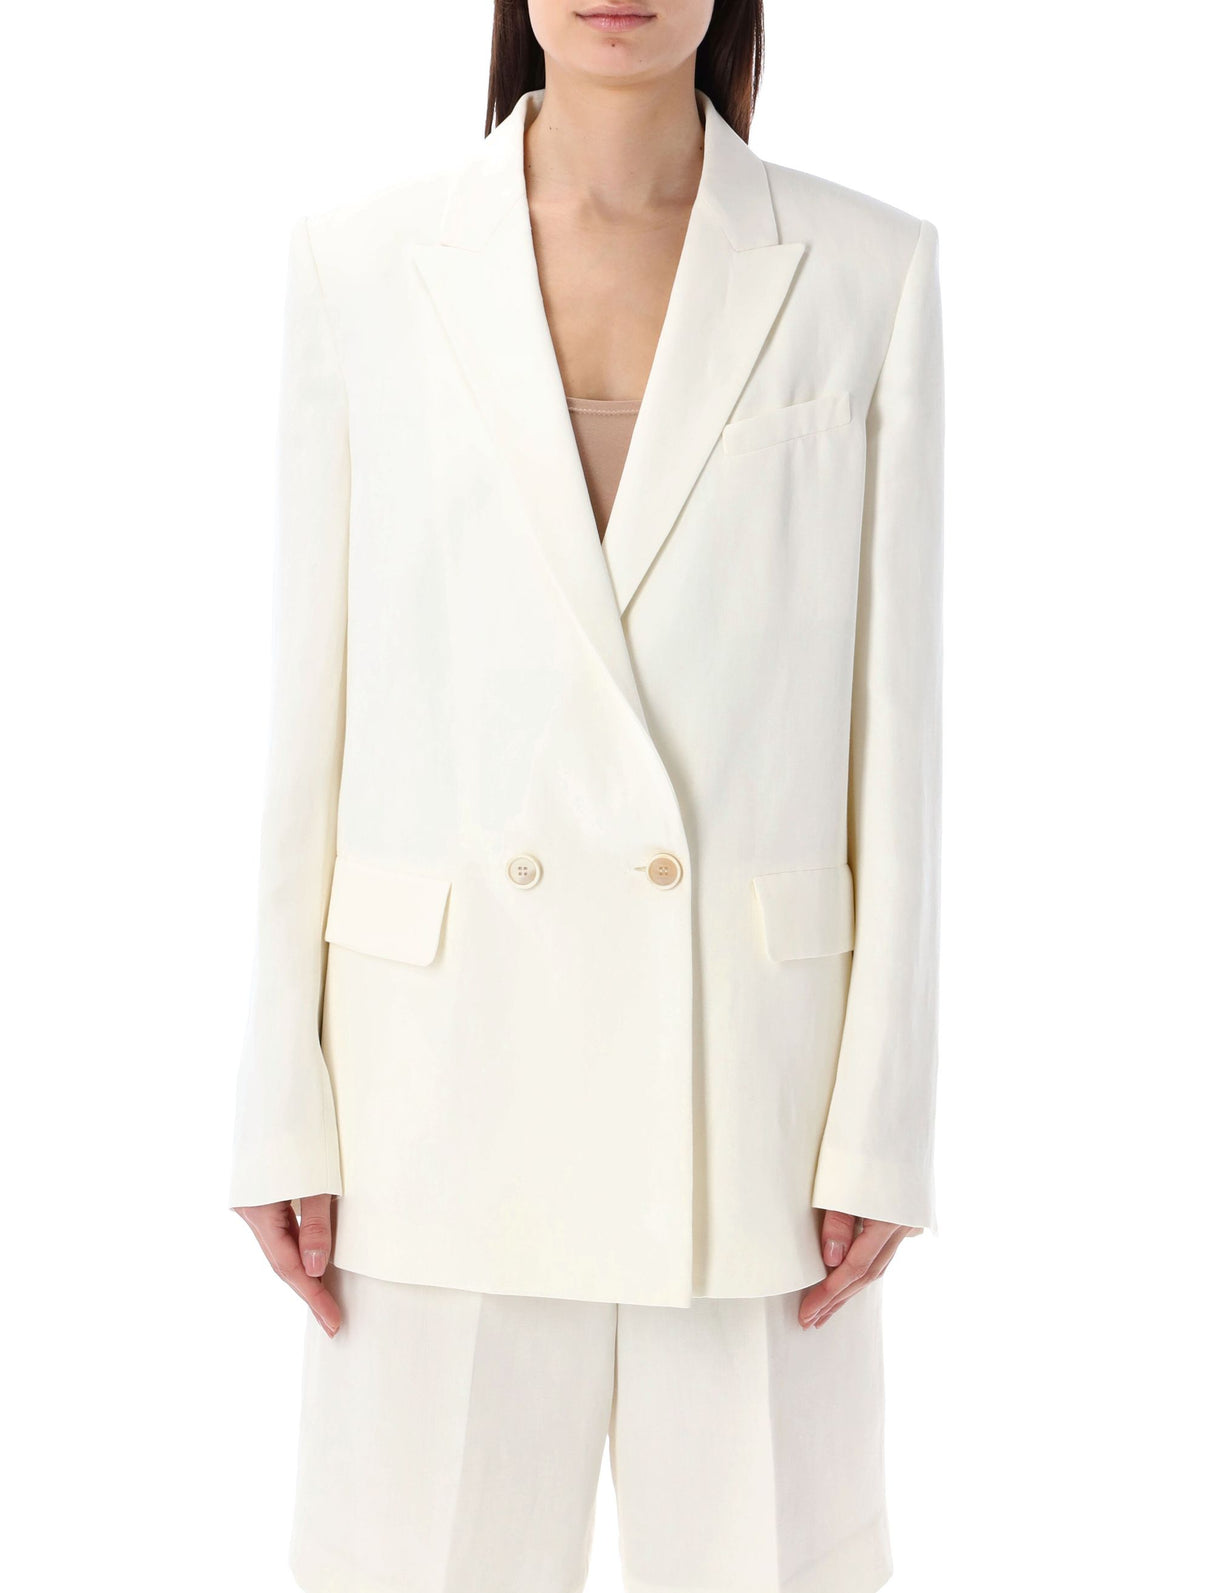 FABIANA FILIPPI Women's White V-Neck Blazer with Padded Shoulders and Front Button Closure